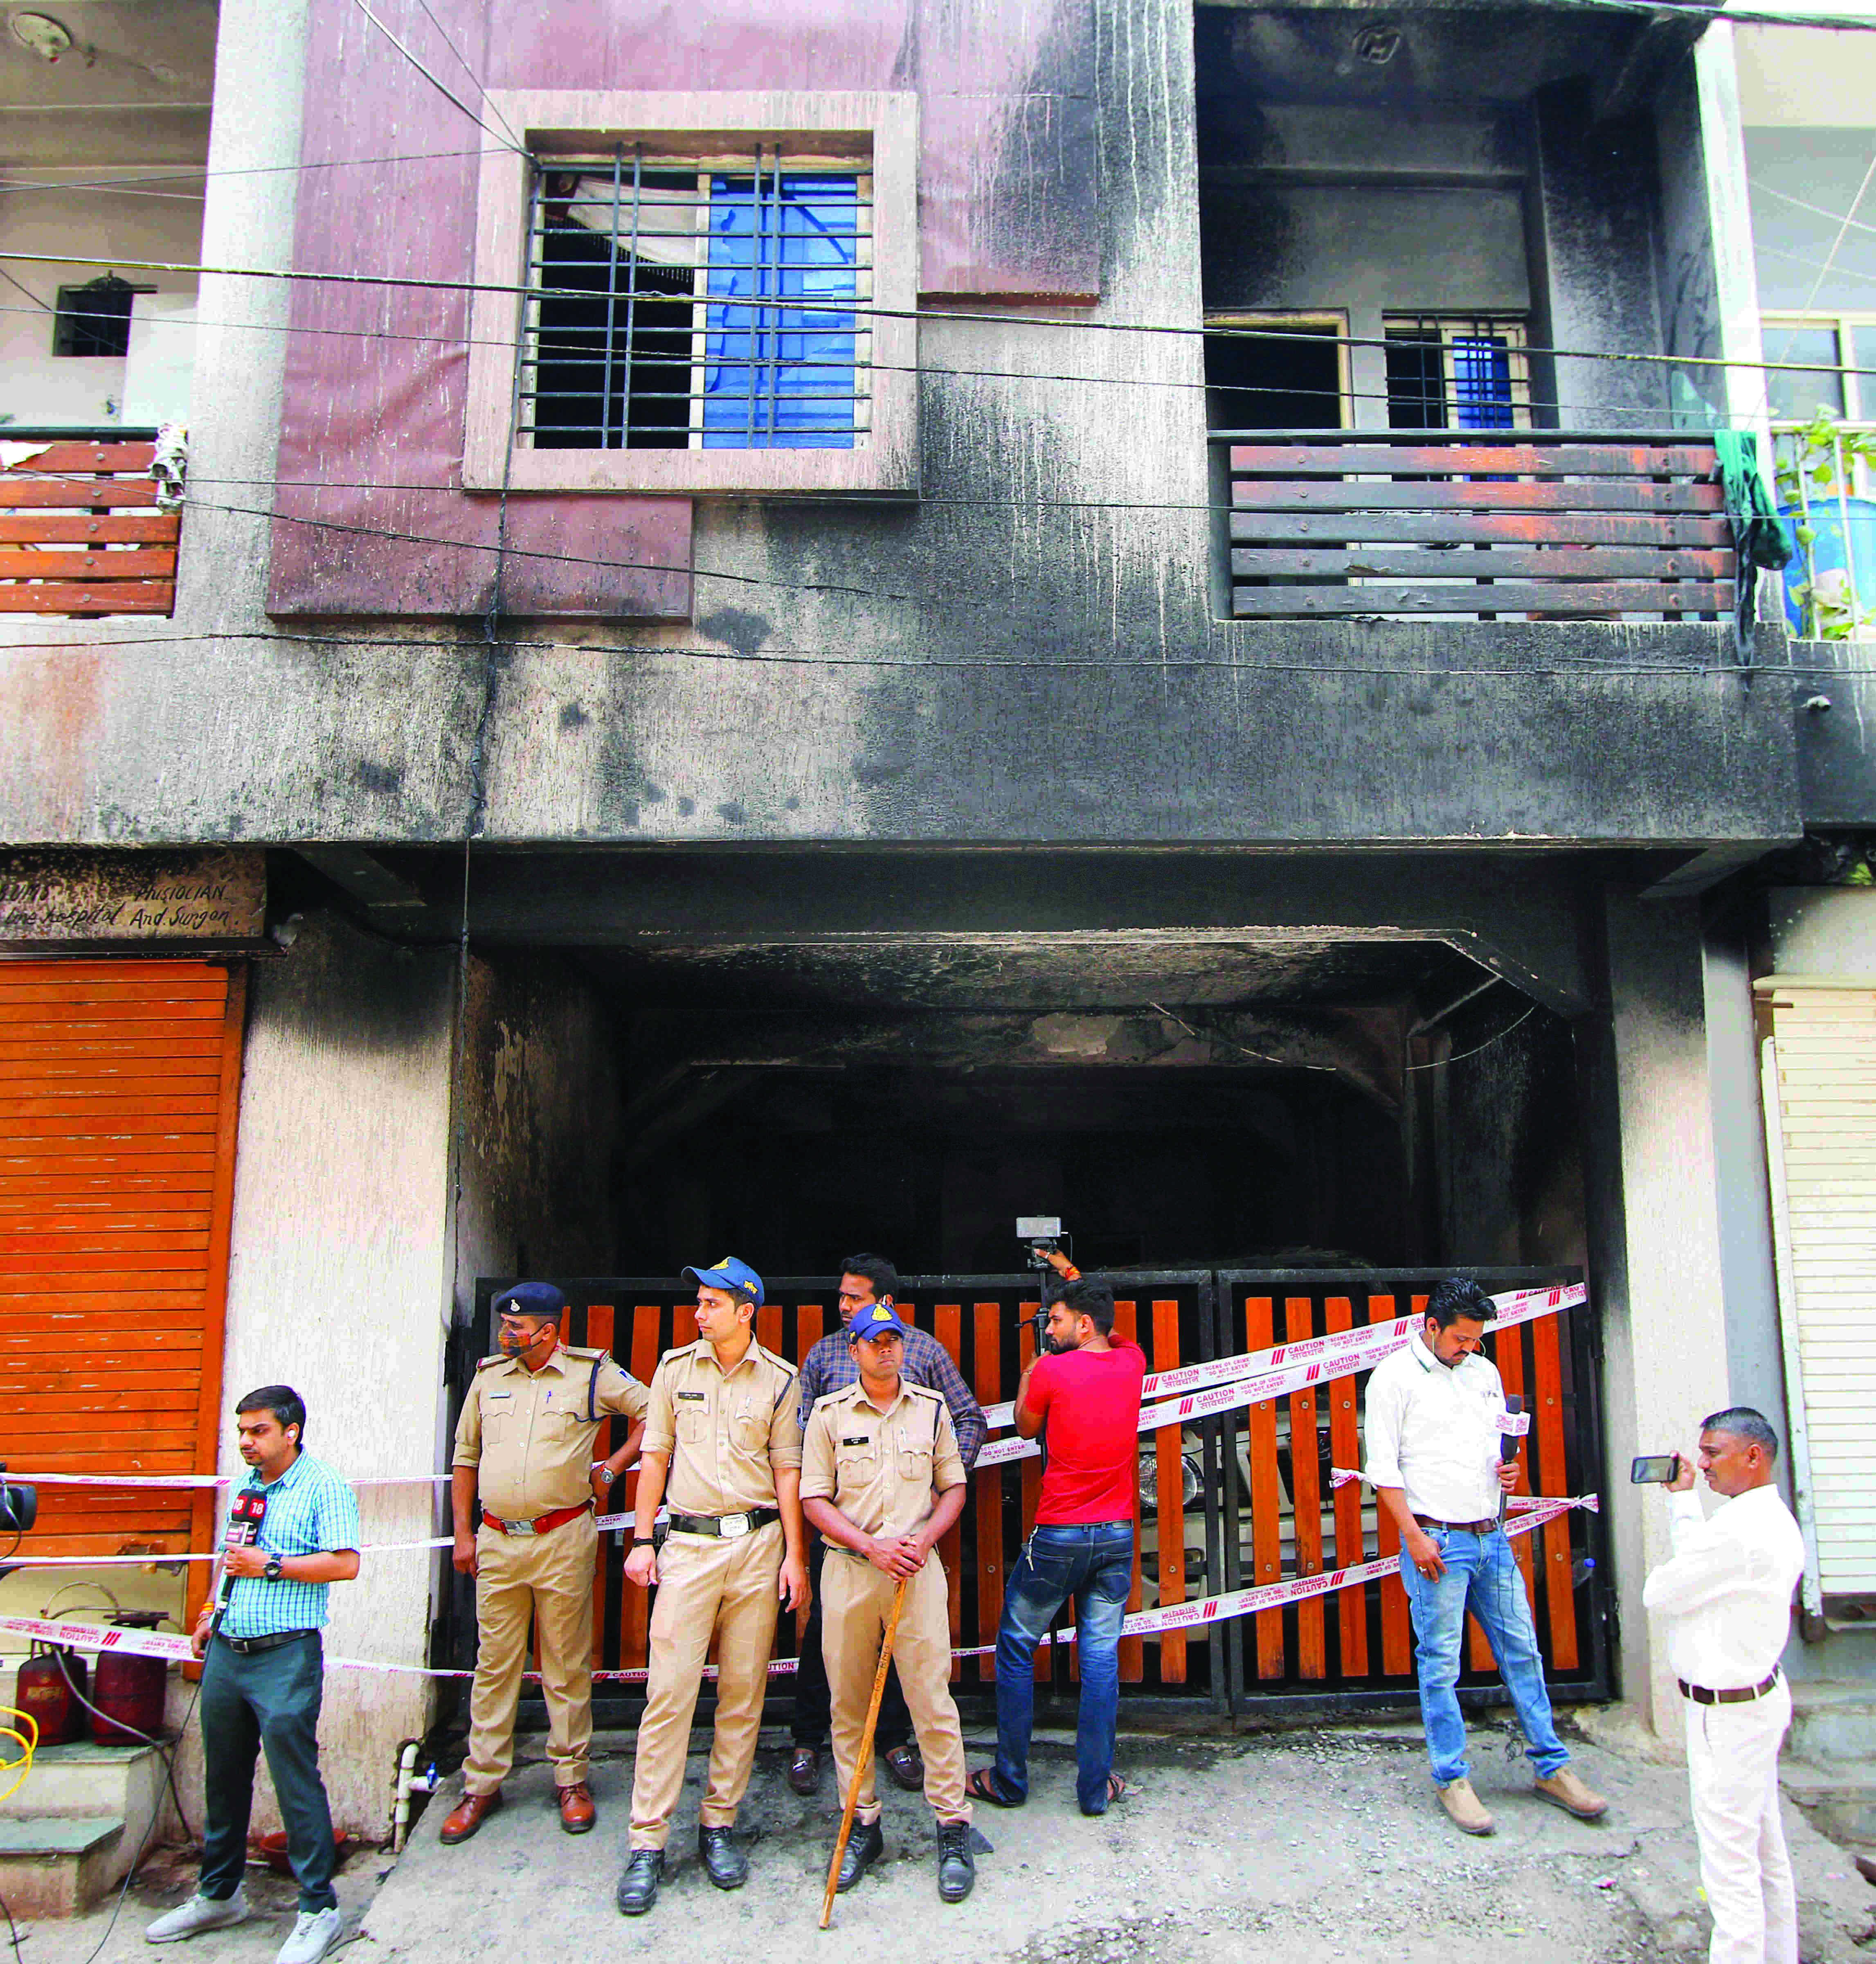 MP: 7 dead, 9 injured in major fire at Indore residential building